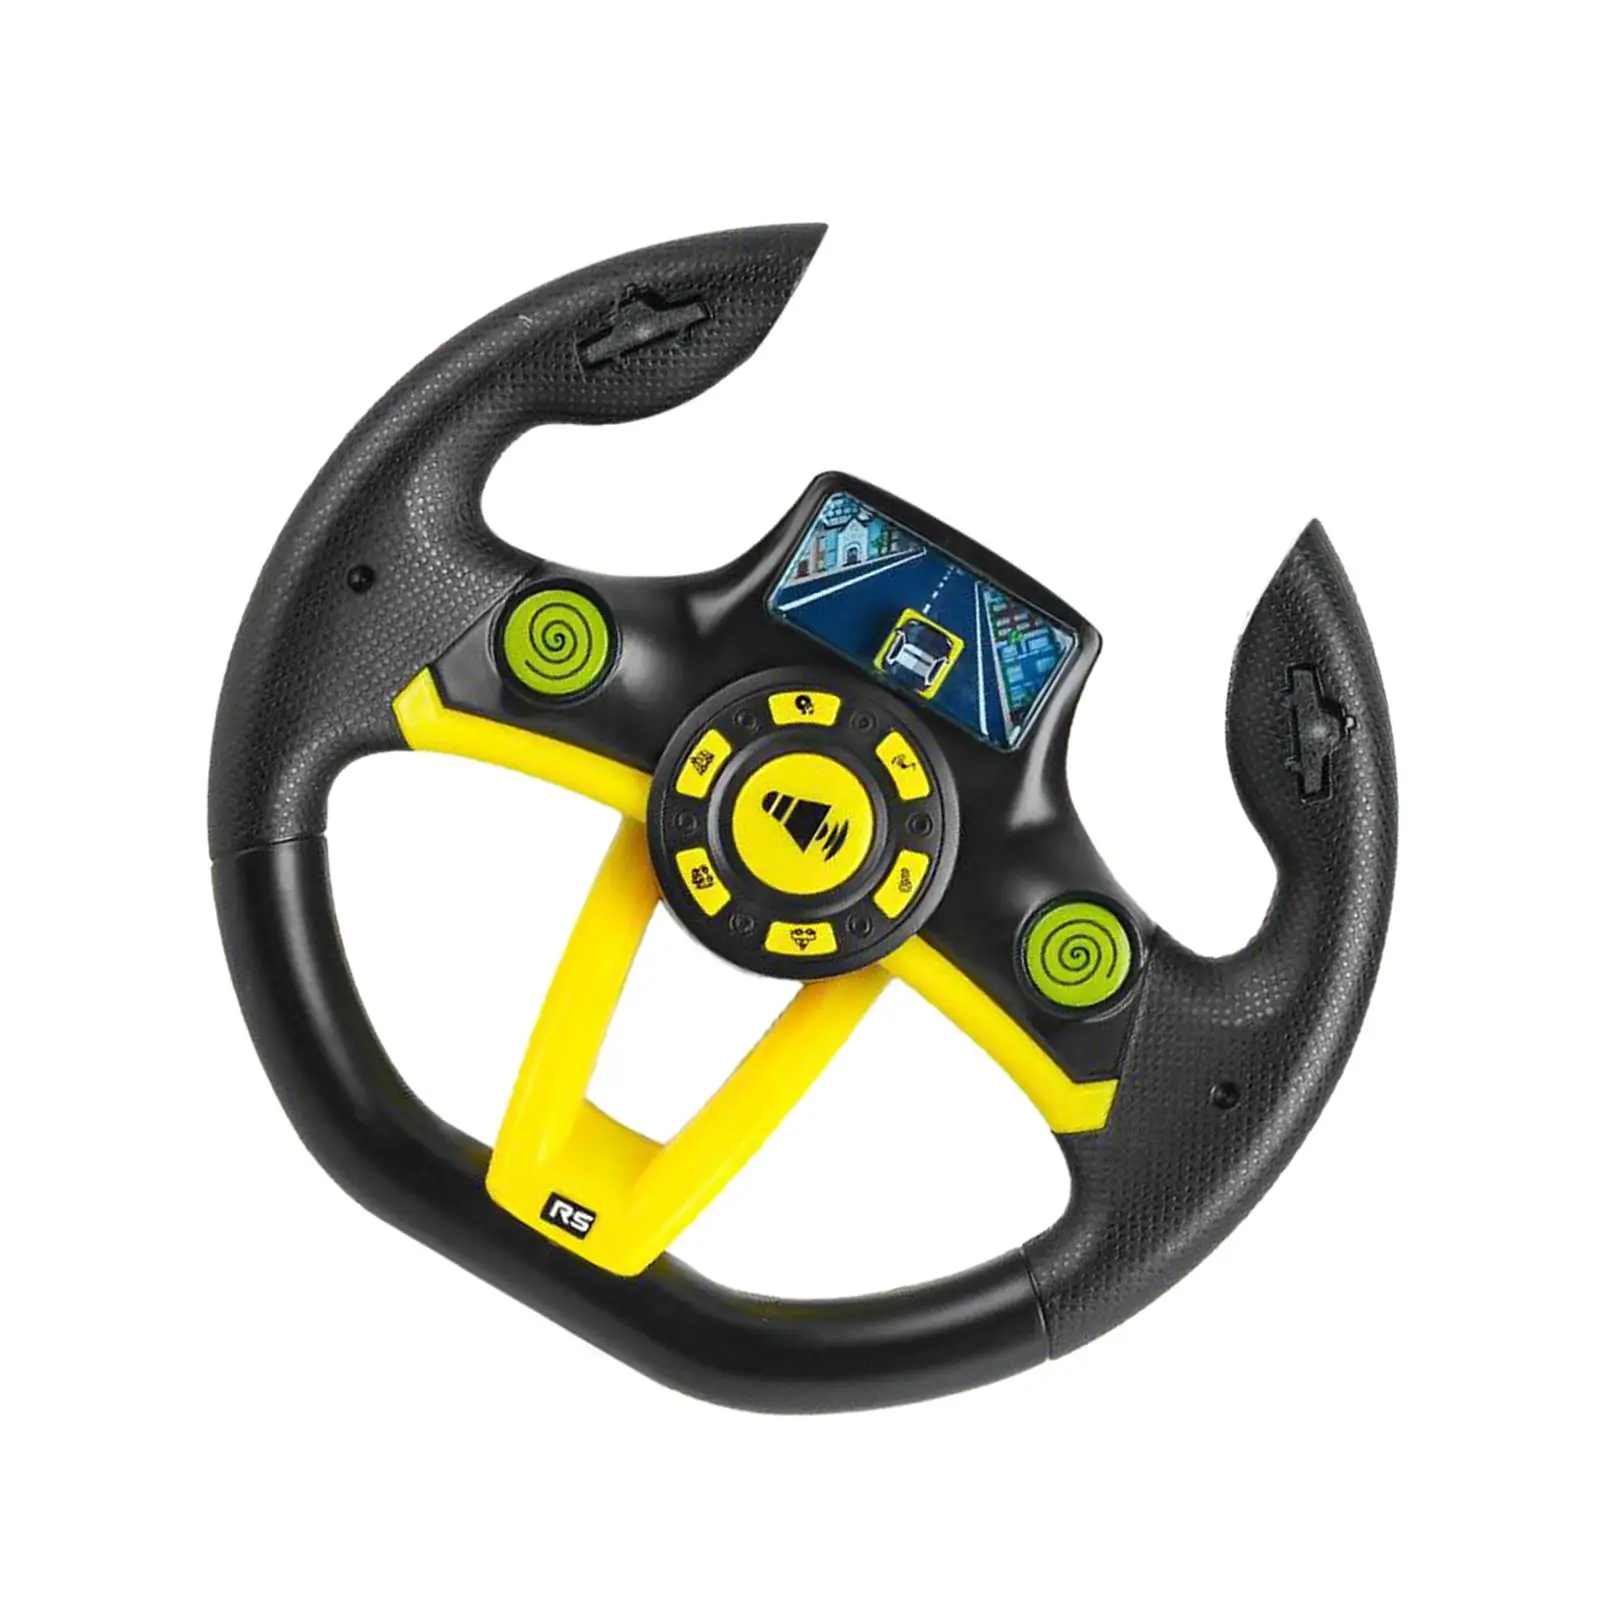 Round Steering Wheel Toy with Lights Busy Board DIY Accessory for Outdoor Playground Amusement Park Birthday Gifts